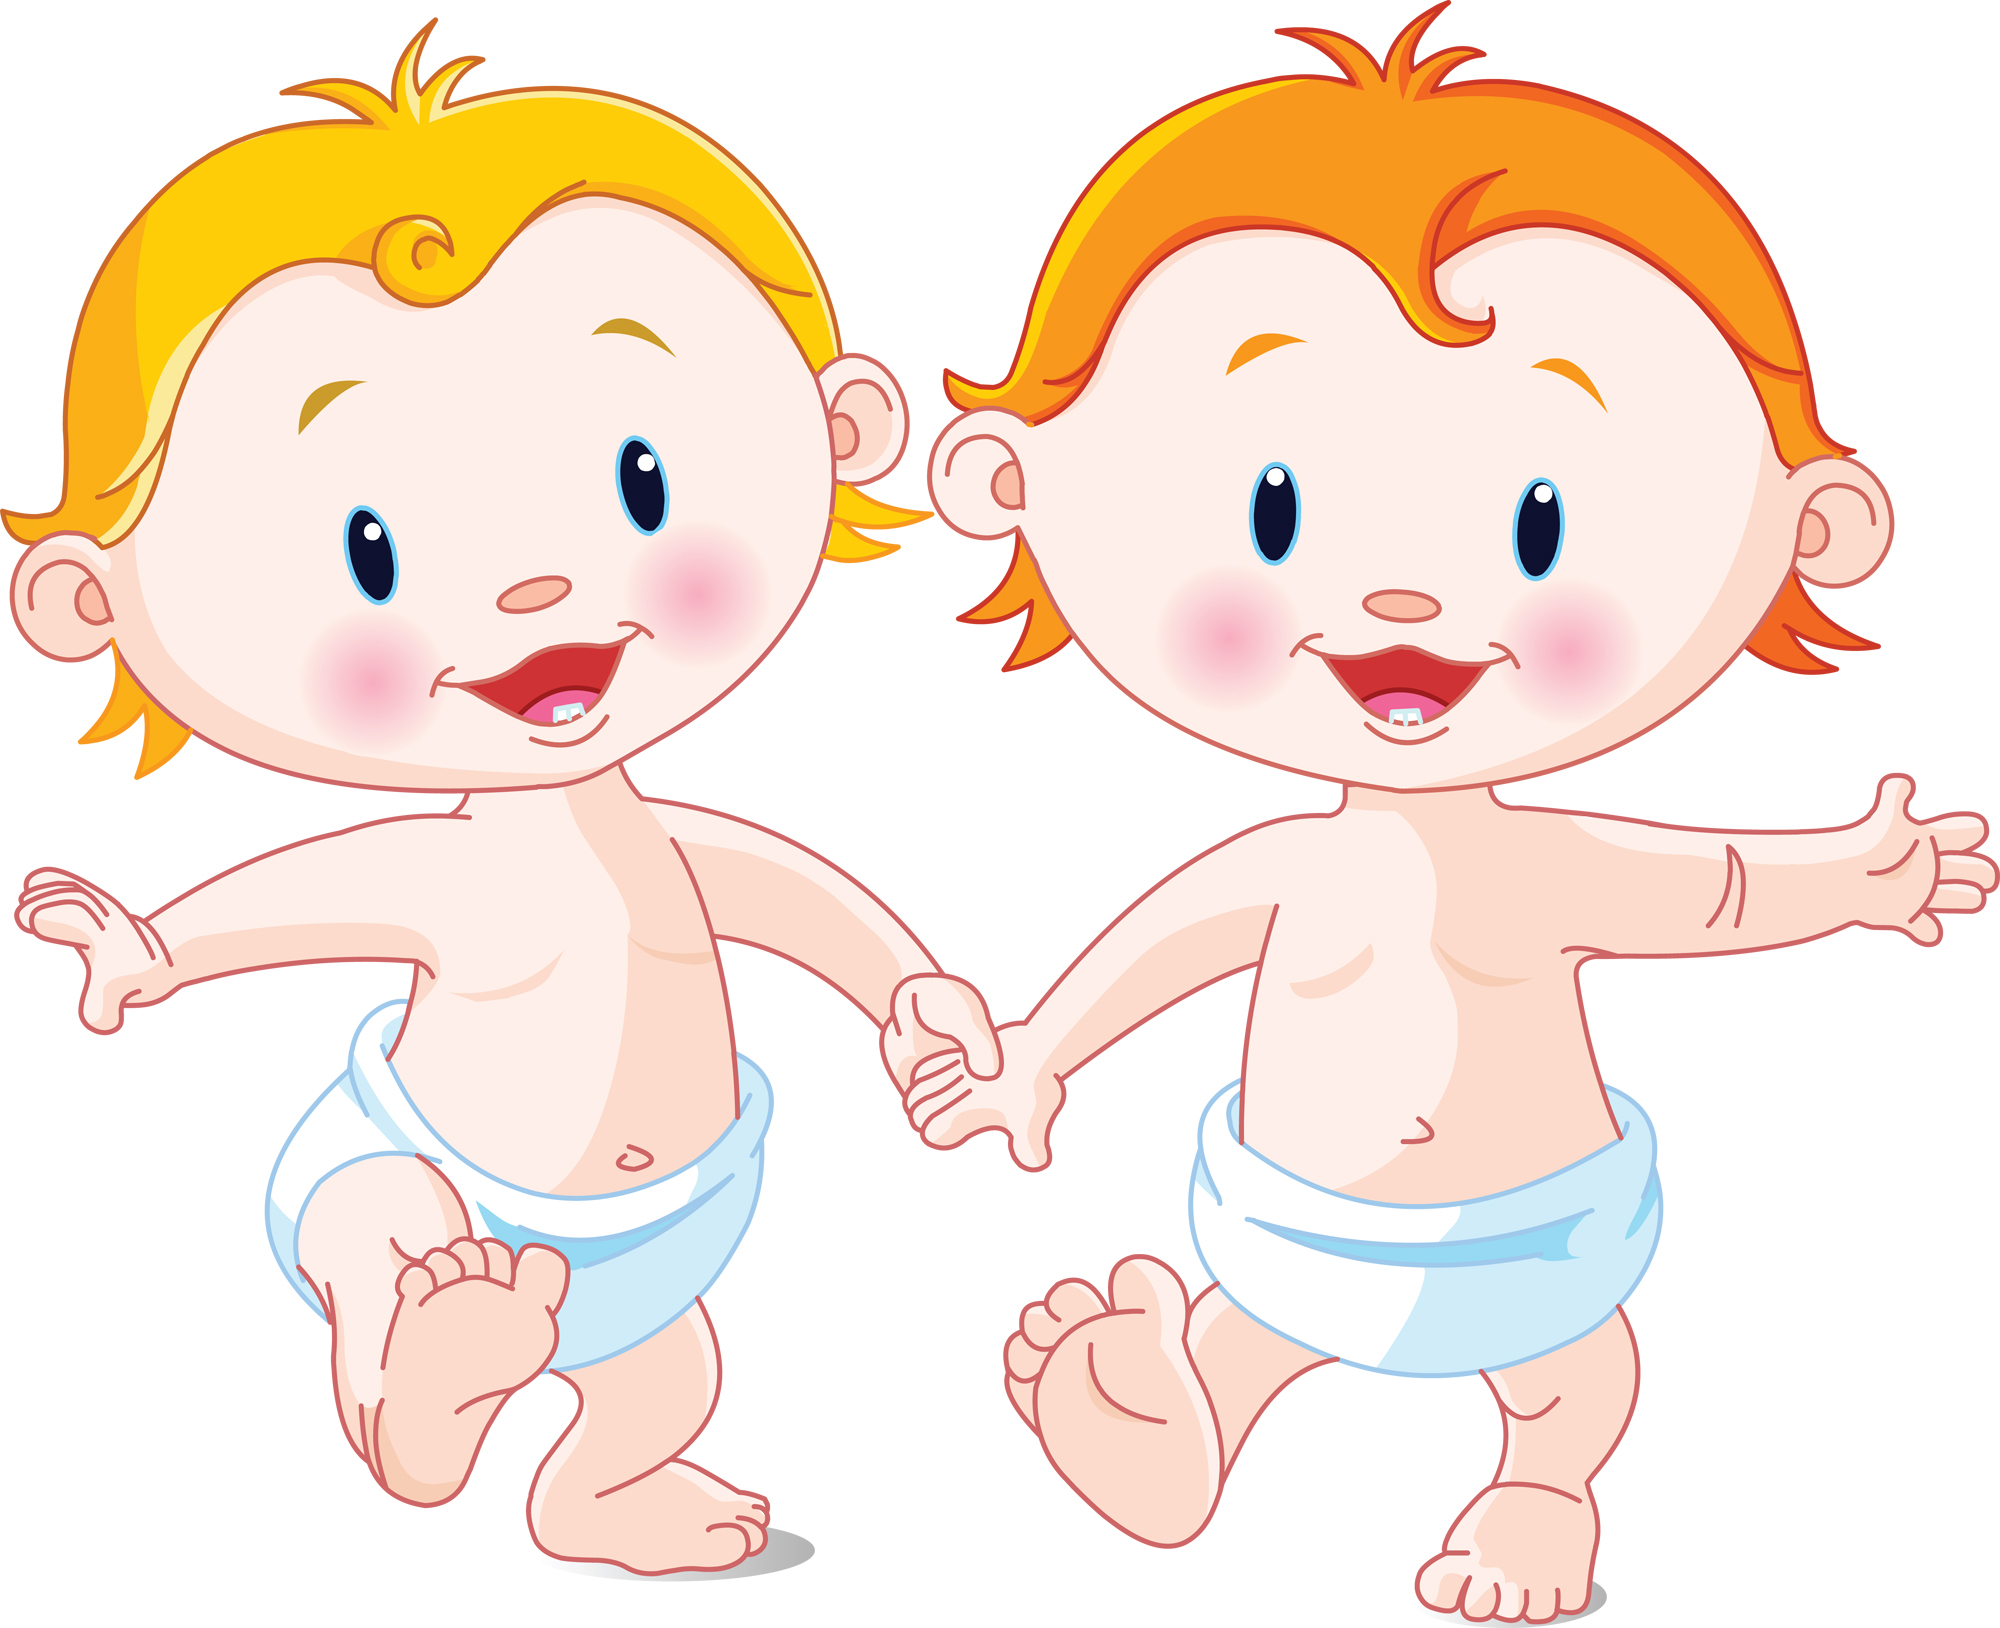 clipart of a newborn baby - photo #38